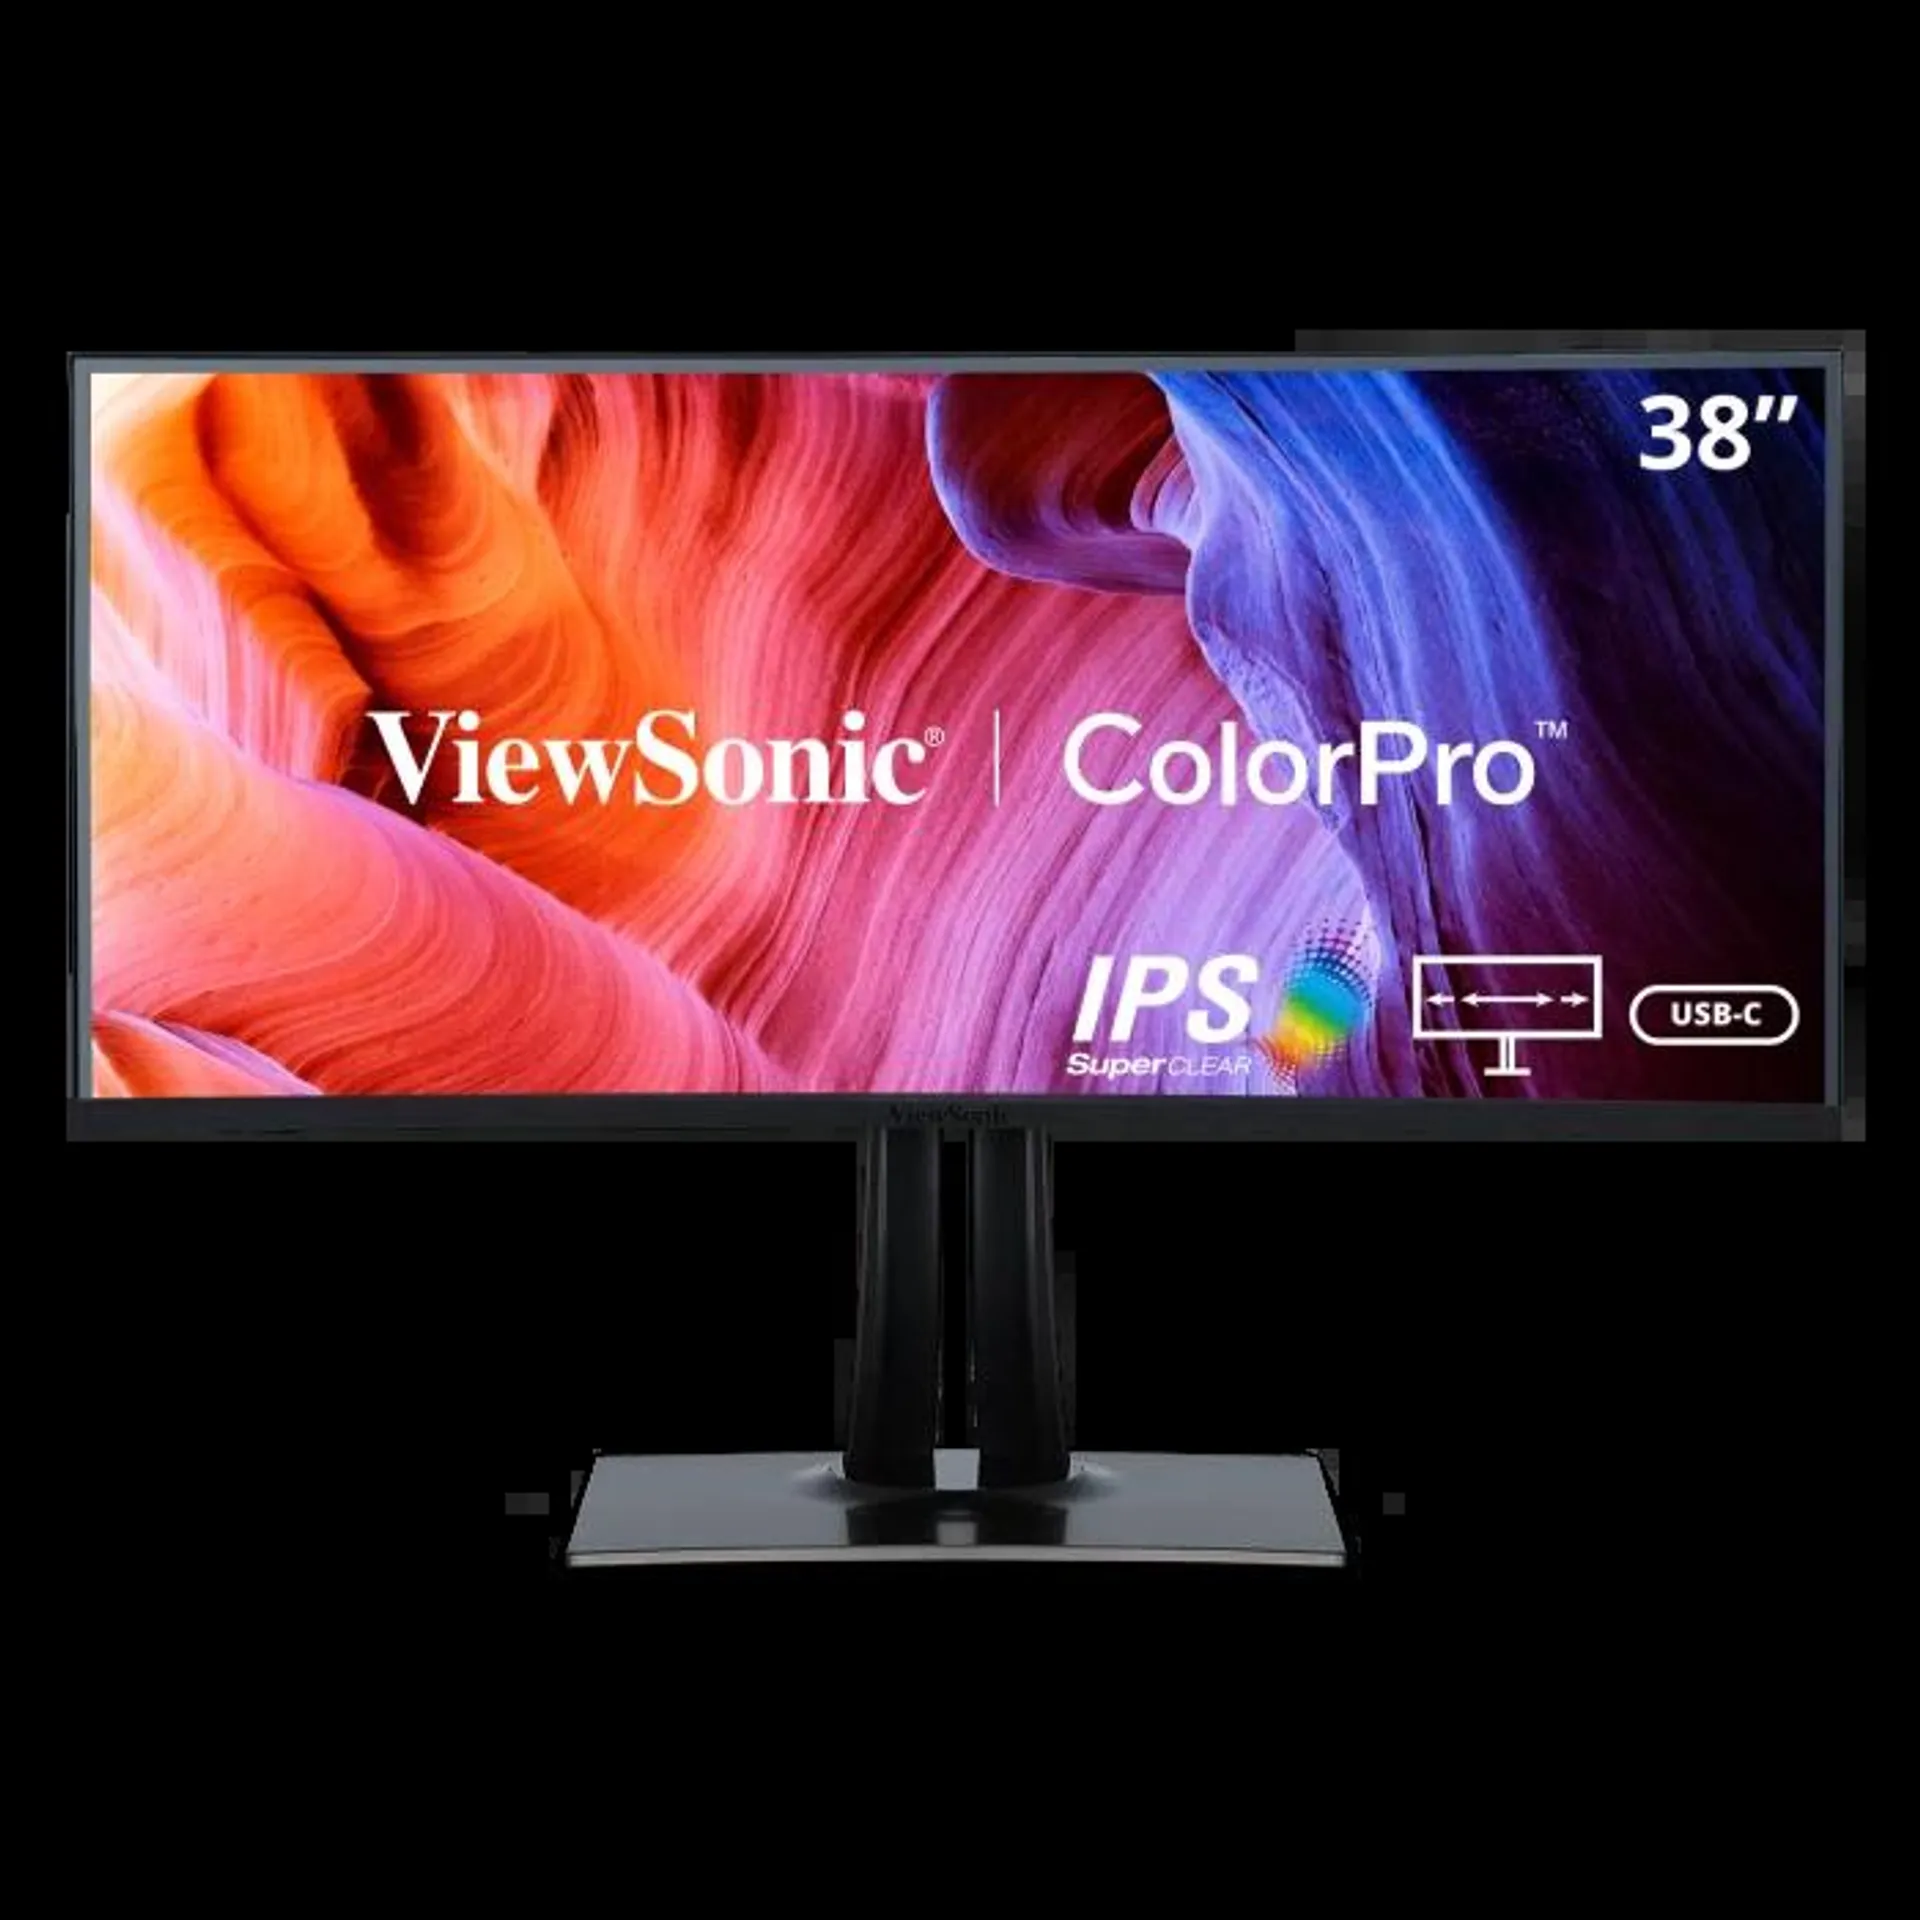 VP3881a - 38" ColorPro™ 21:9 Curved WQHD+ IPS Monitor with 90W USB C, RJ45 and sRGB